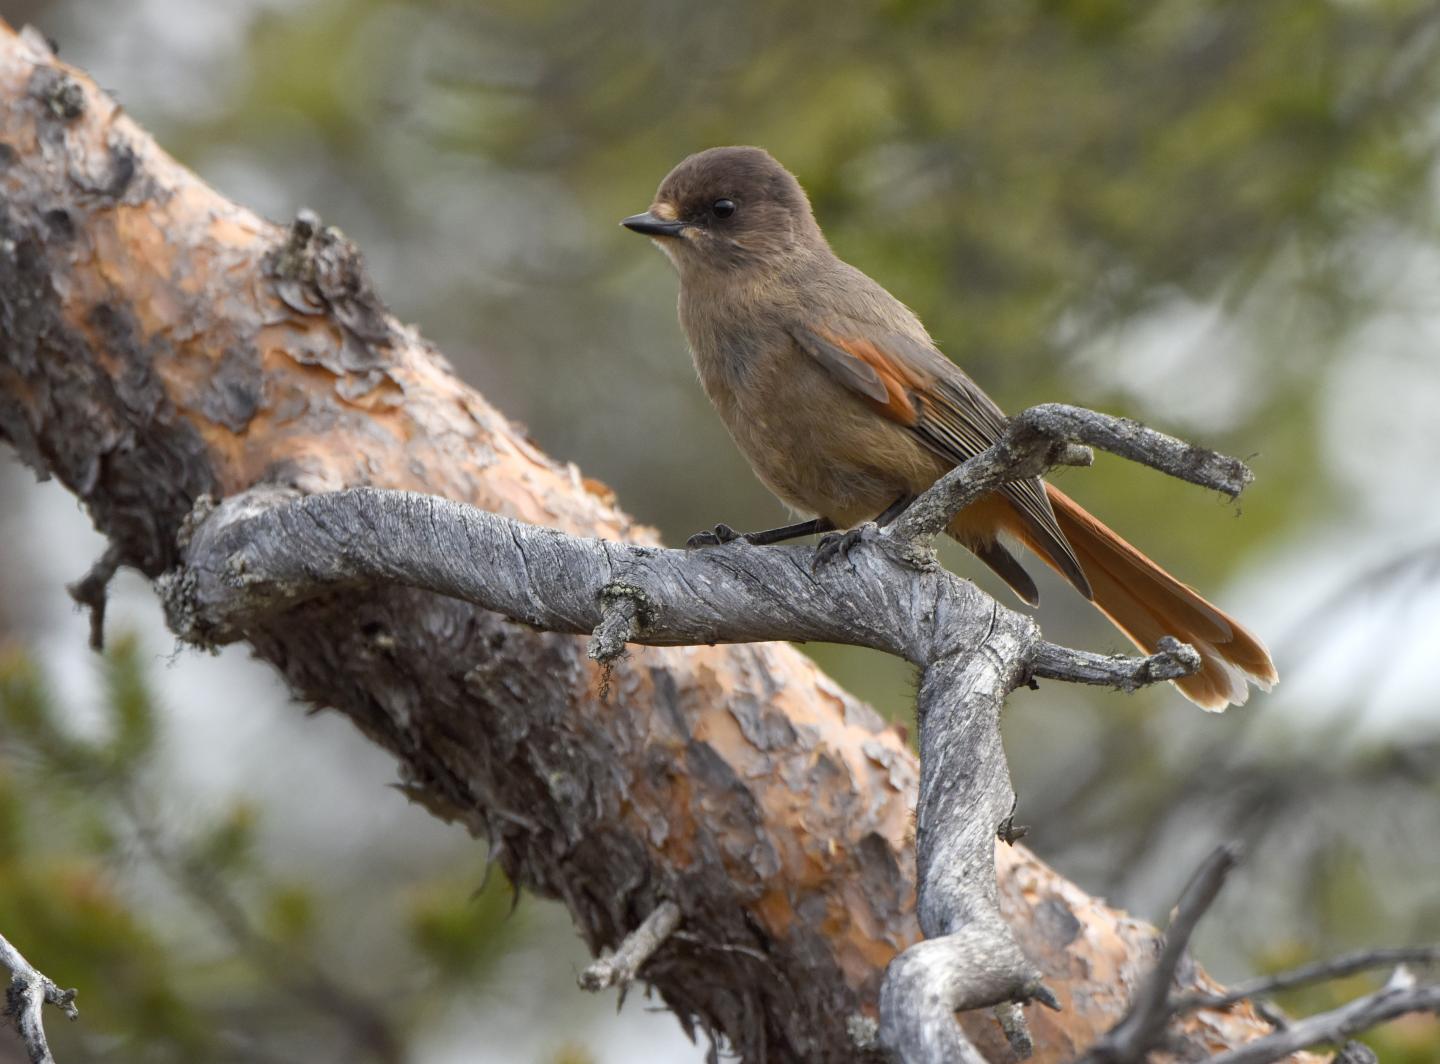 The Siberian Jay Is An Indicator Species of Boreal Forests